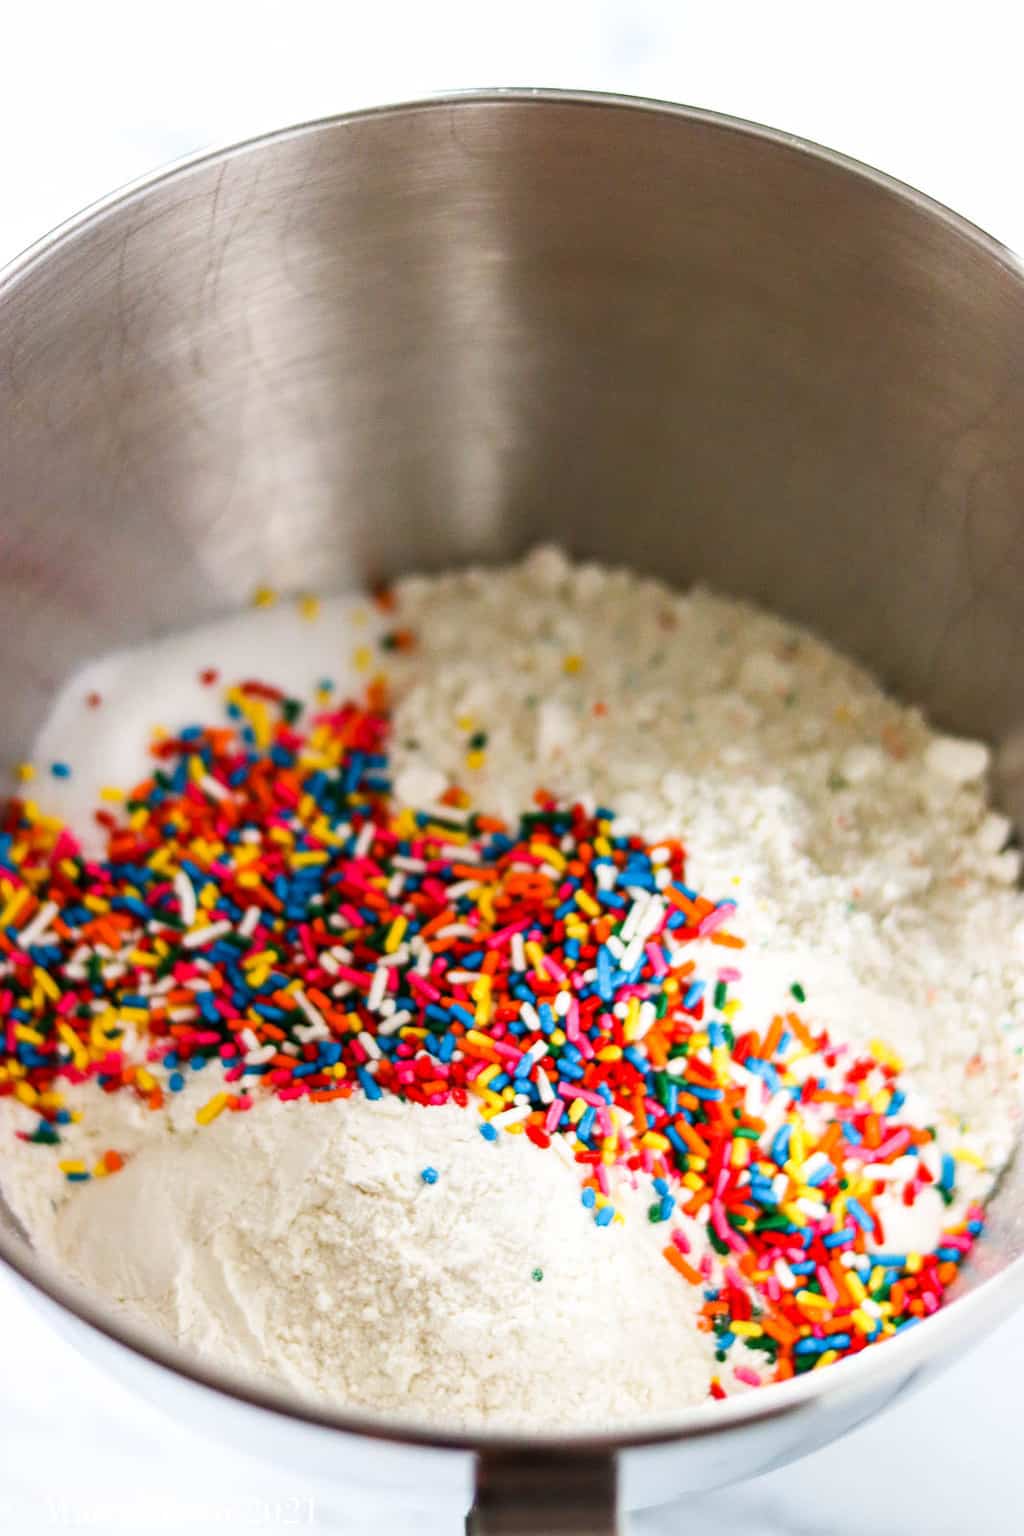 A mixing bowl with confetti cake mix, flour, sugar, and sprinkles